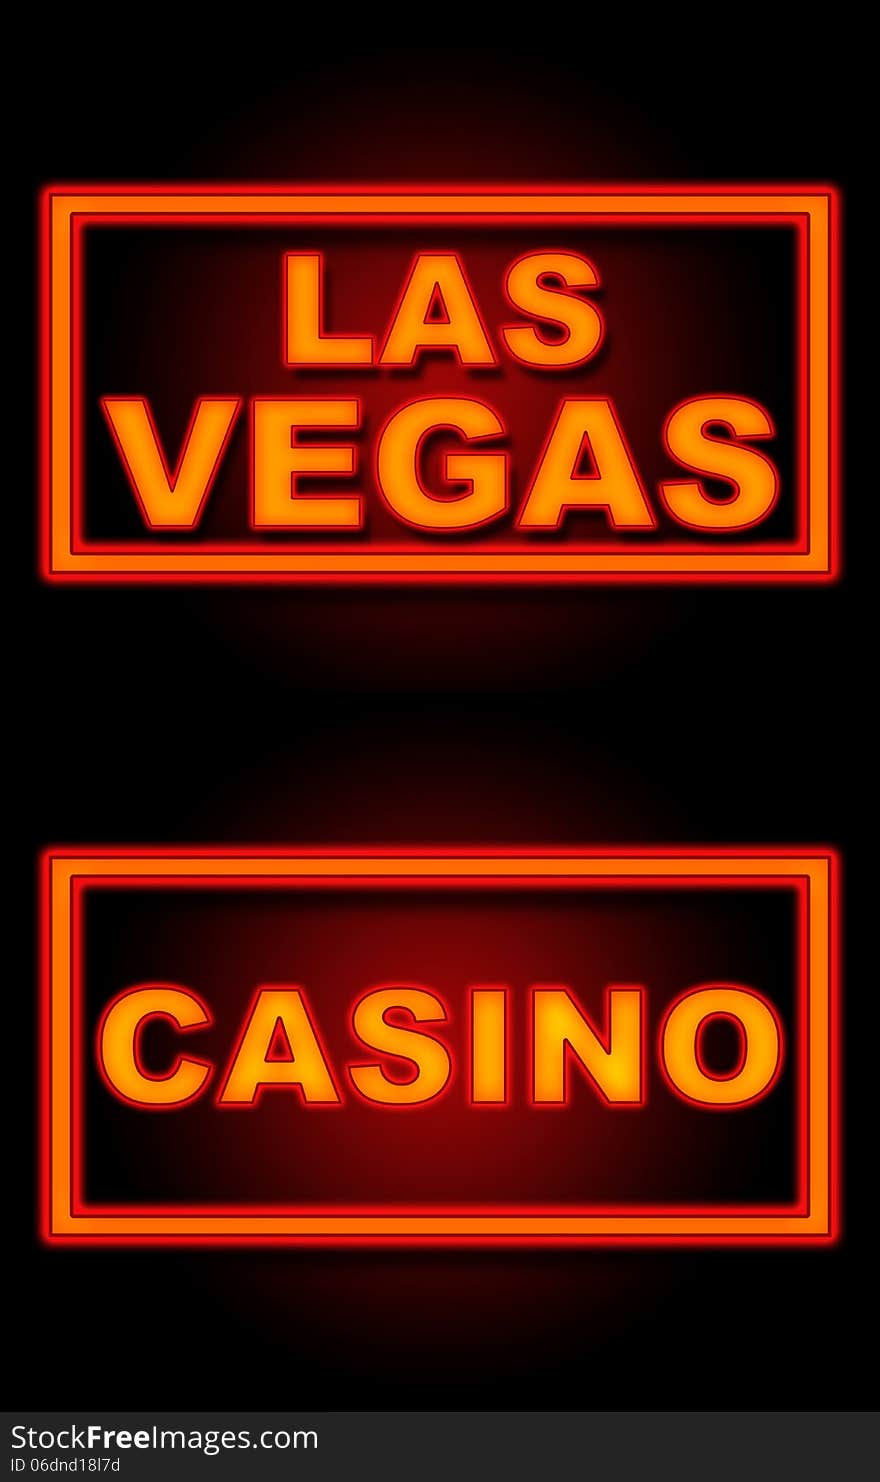 Las Vegas and Casino text in neon sign over black background. Las Vegas and Casino text in neon sign over black background.